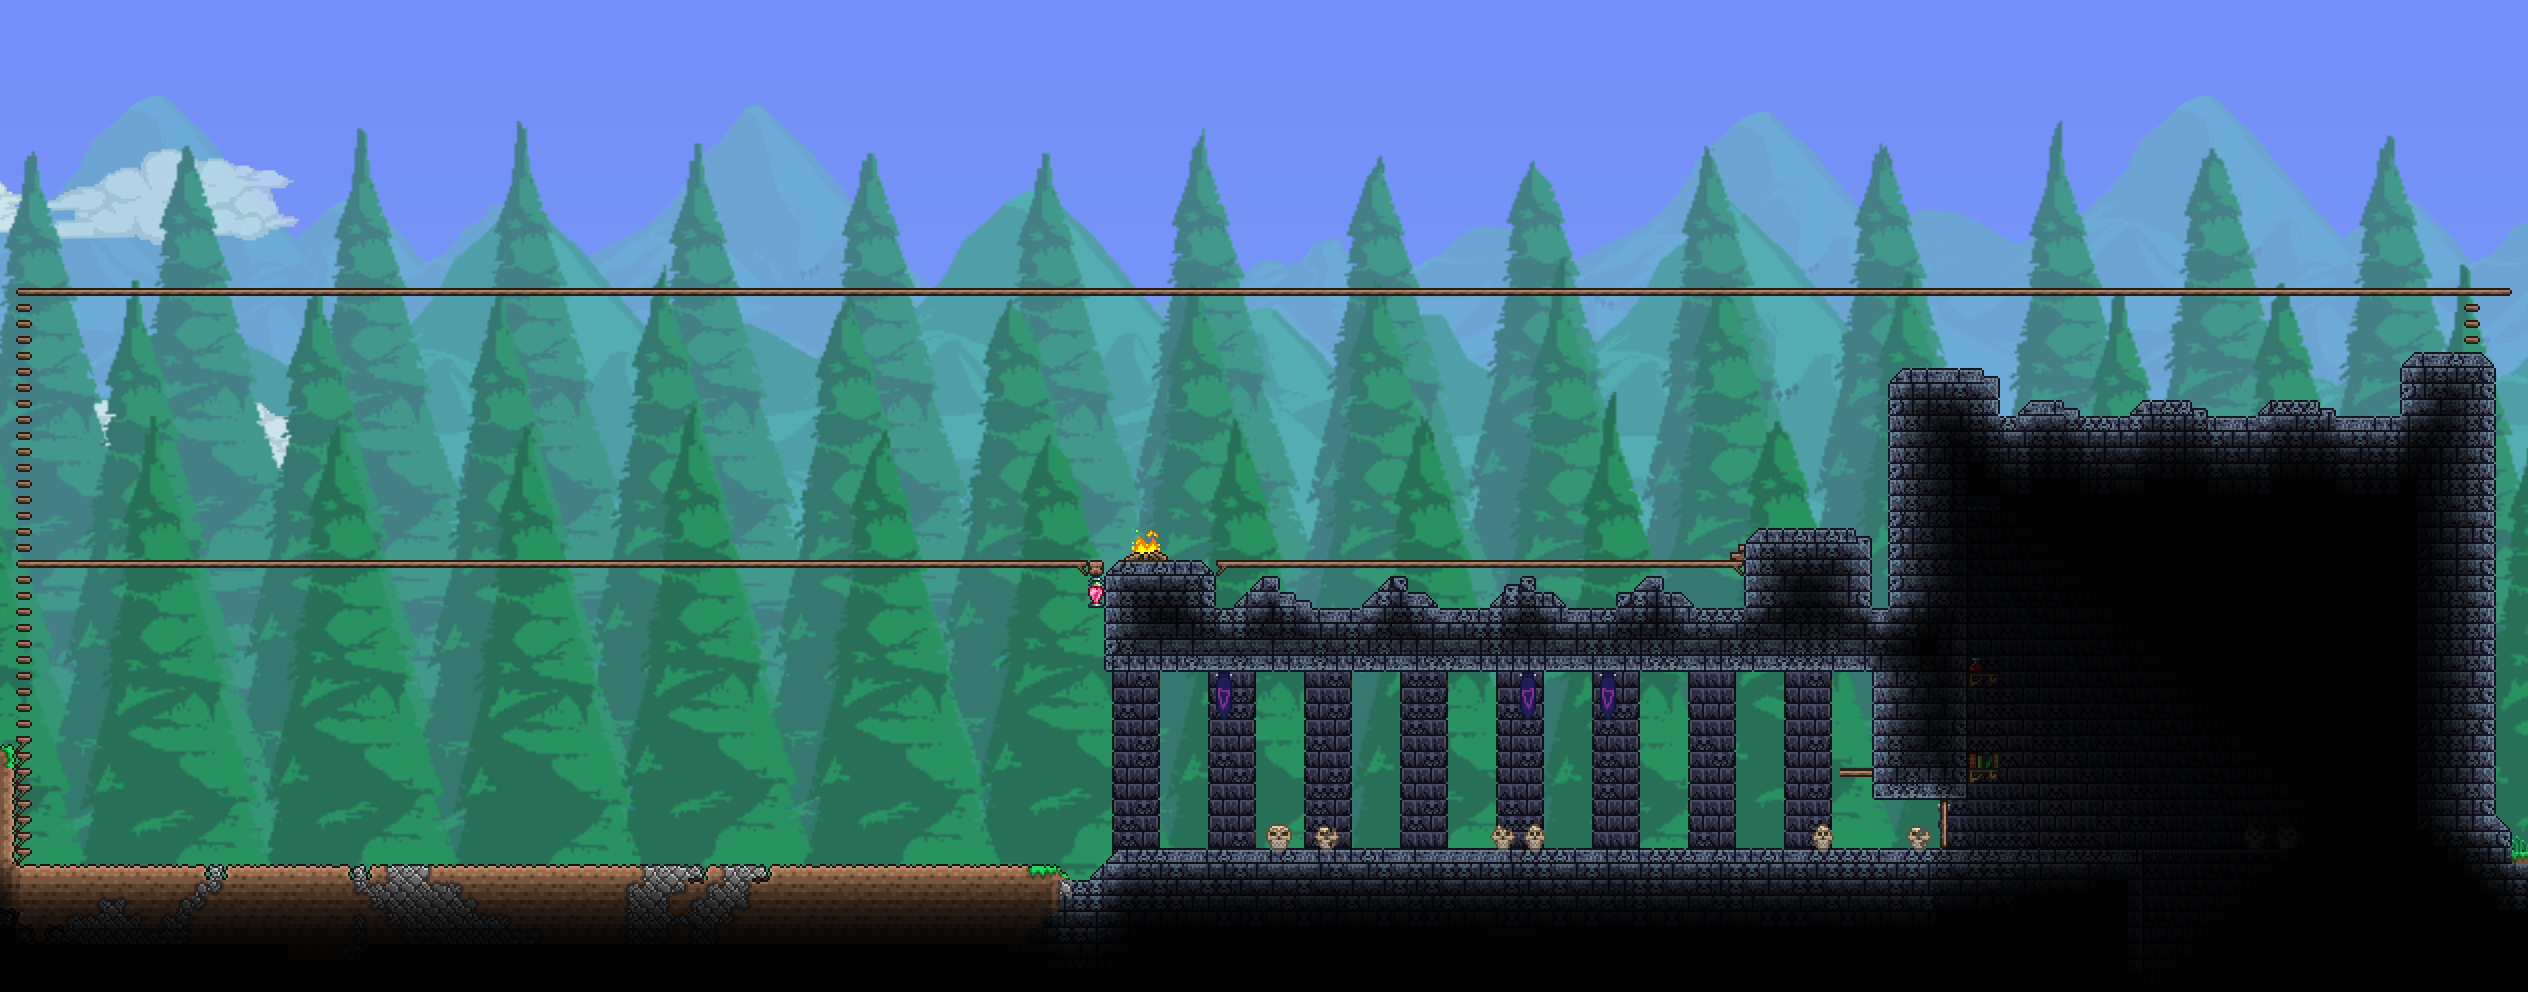 Rate my boss arena and what else do i need to beat the mechs? : r/Terraria